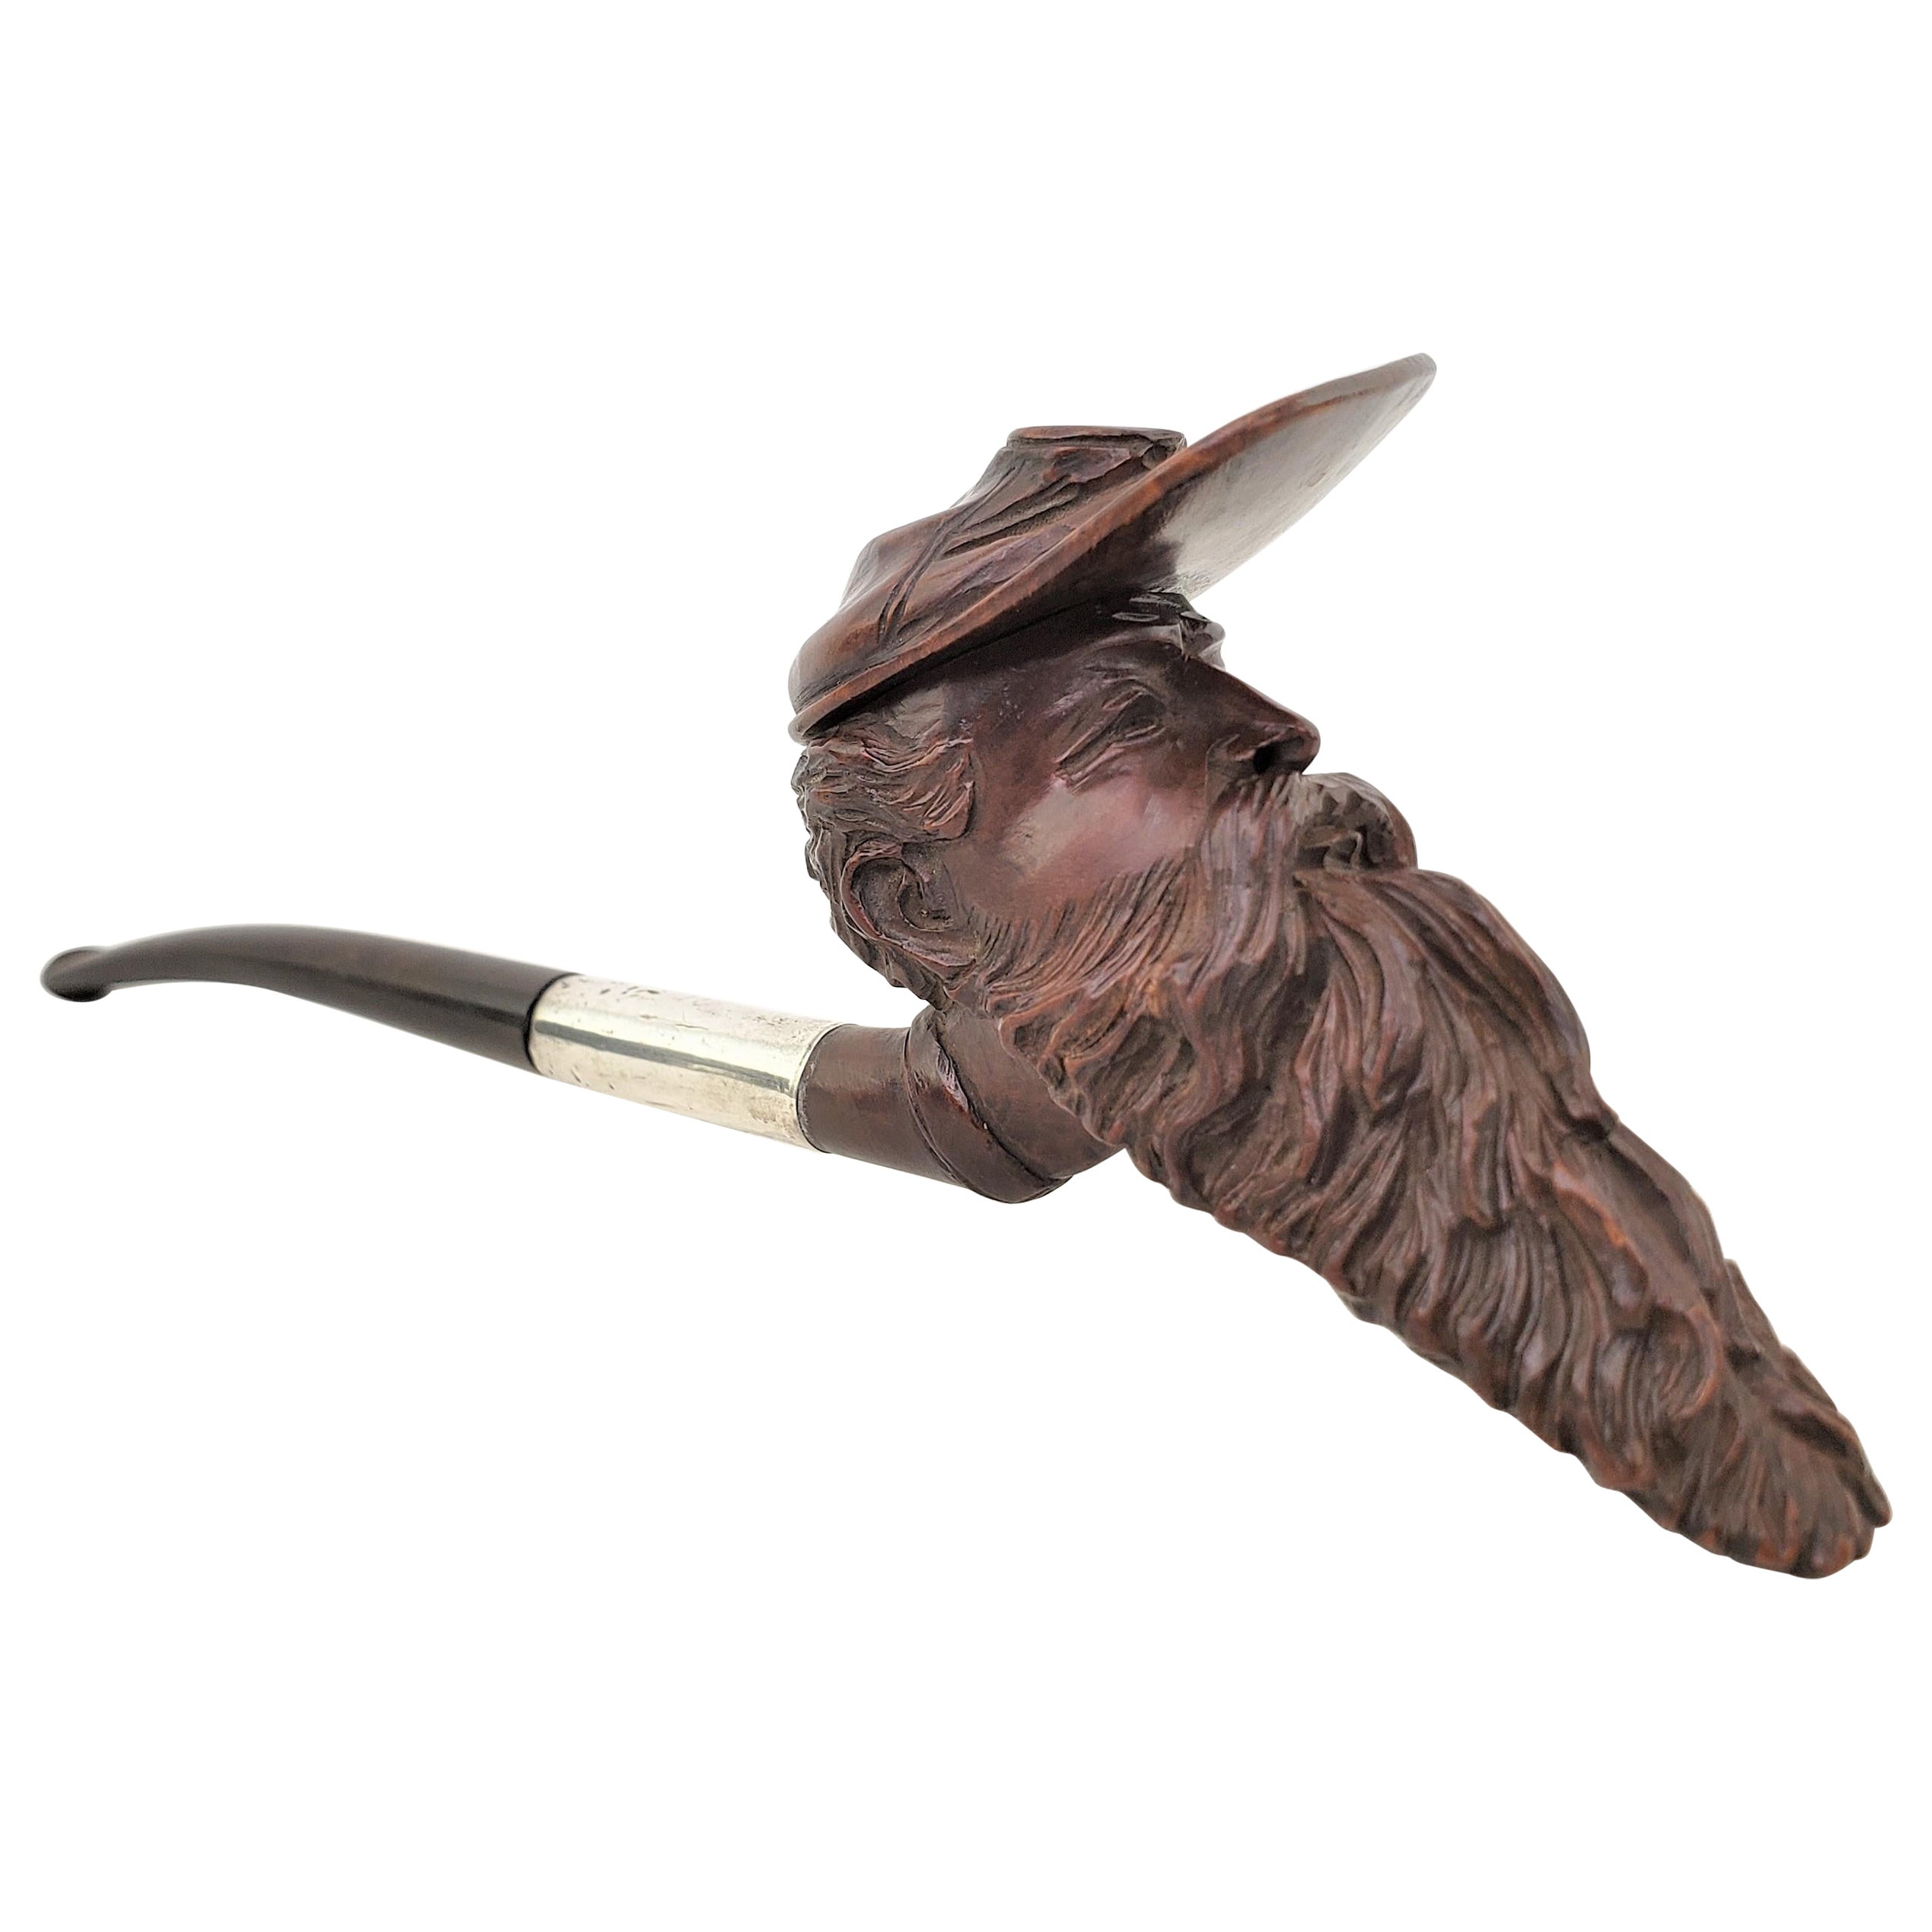 Antique Hand-Carved Hardwood Figural Confederate Soldier Styled Smoking Pipe For Sale